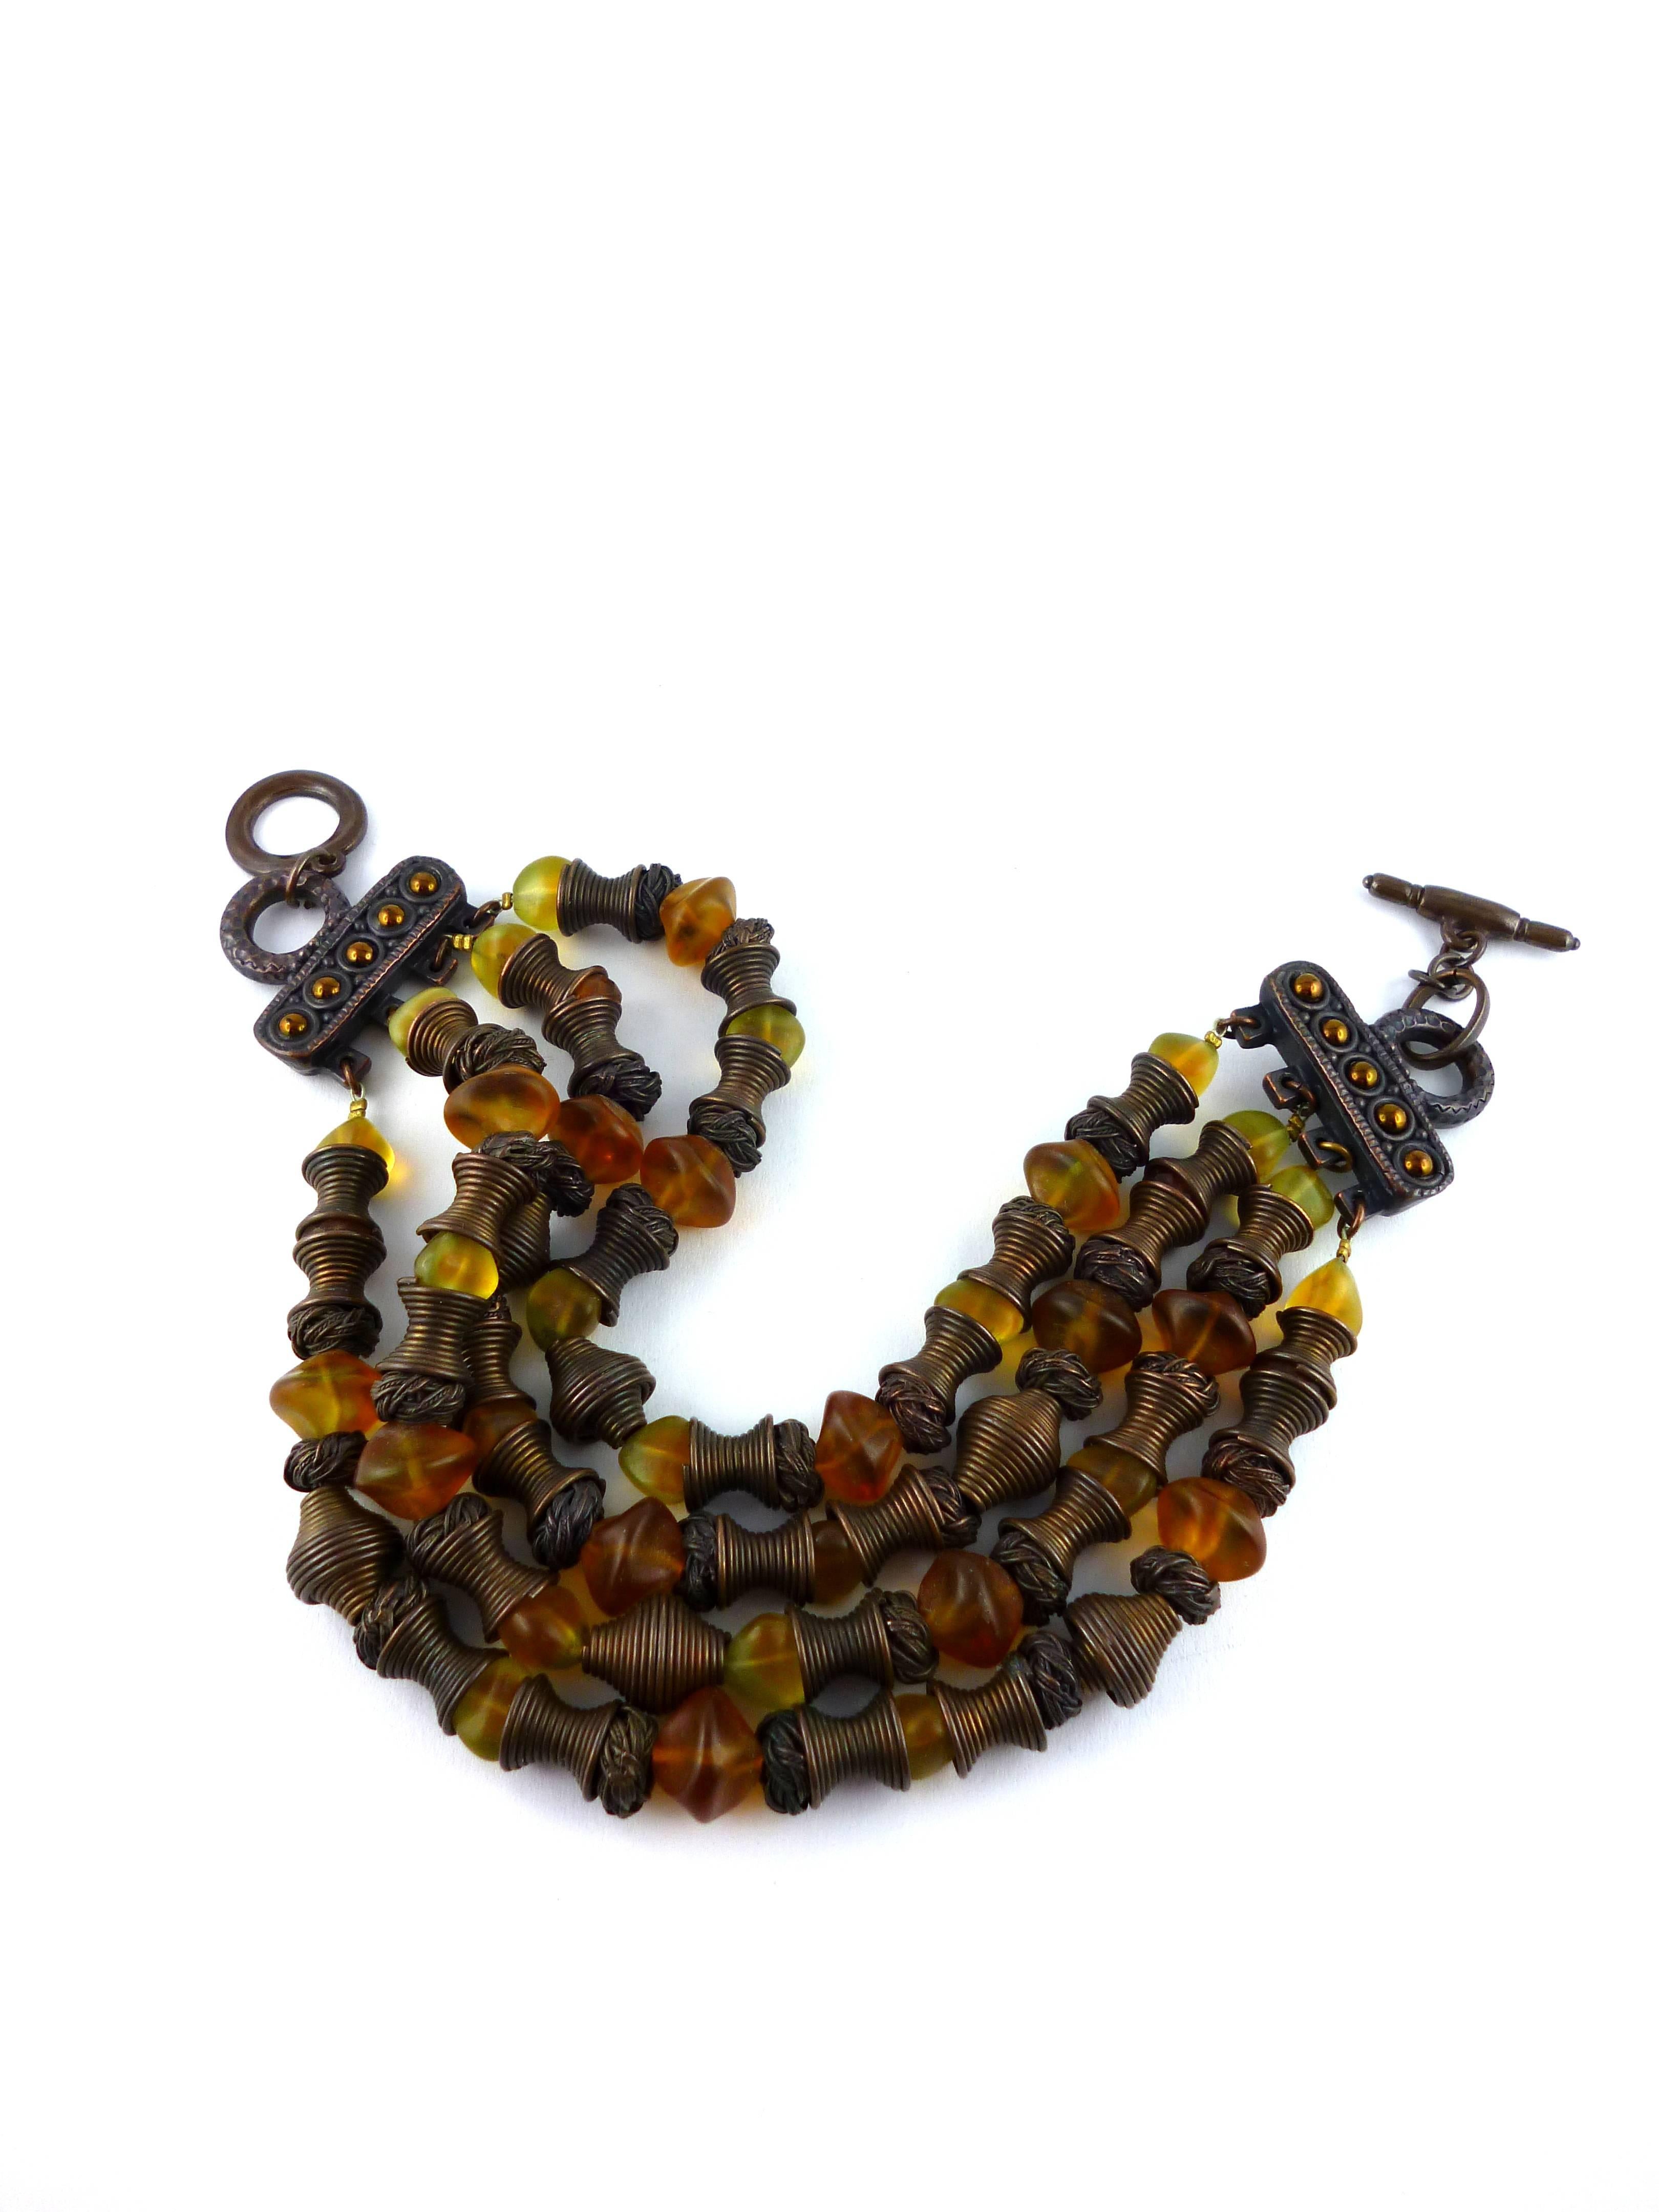 JEAN PAUL GAULTIER vintage Massaï choker necklace consisting of four raws of metal and irregular amber glass beads.

Embossed JPG.

Note
As a buyer, you are fully responsible for customs duties, other local taxes and any administrative